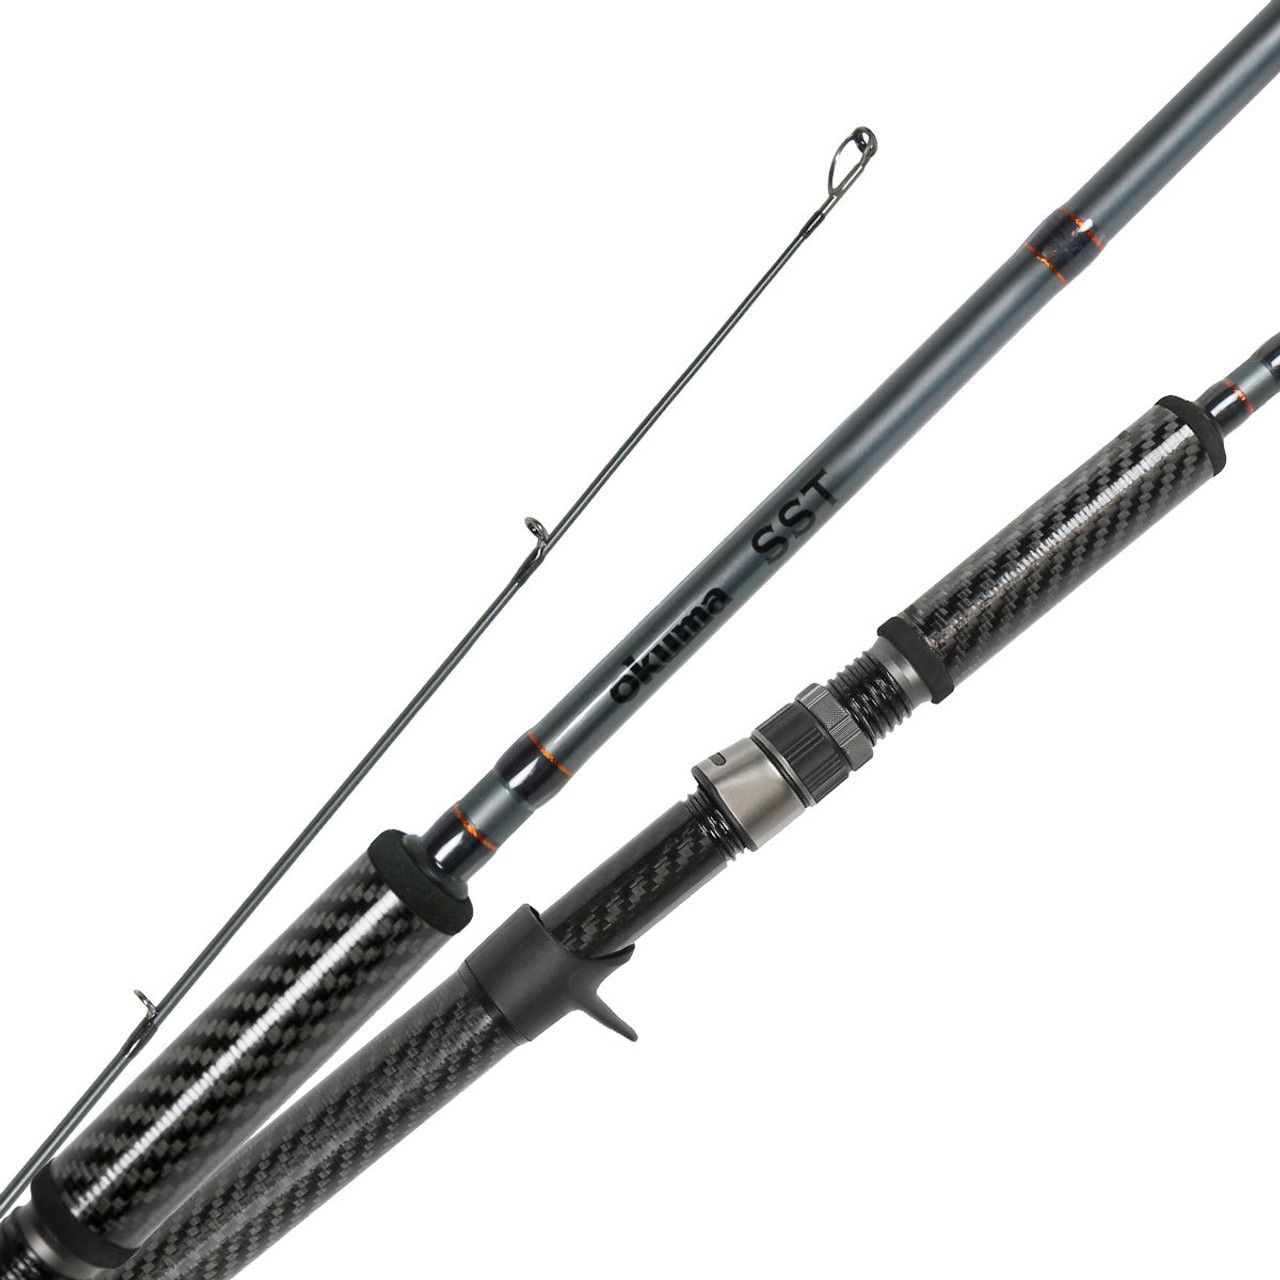 Okuma SST New Moderate Action Fishing rod with carbon grip MH 10-30LB 9'6  2PC SPIN CP-5 - SteelheadStuff Float and Fly Gear